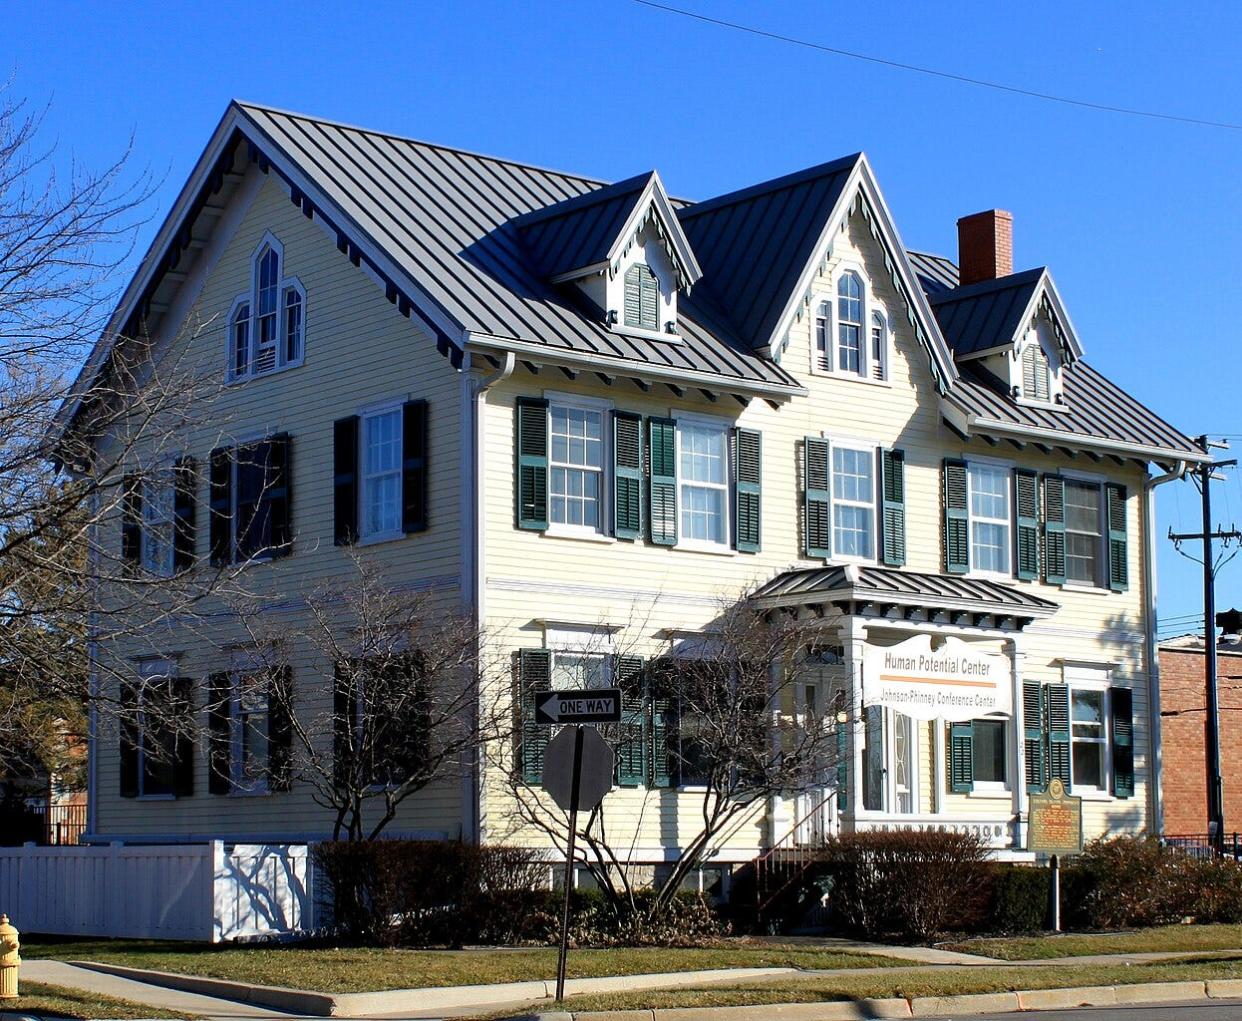 The Johnson-Phinney House in Monroe is the current headquarters of the Monroe County Historical Society, founded in 1938. New members are always welcome and may contact David Eby, membership chair, for information.